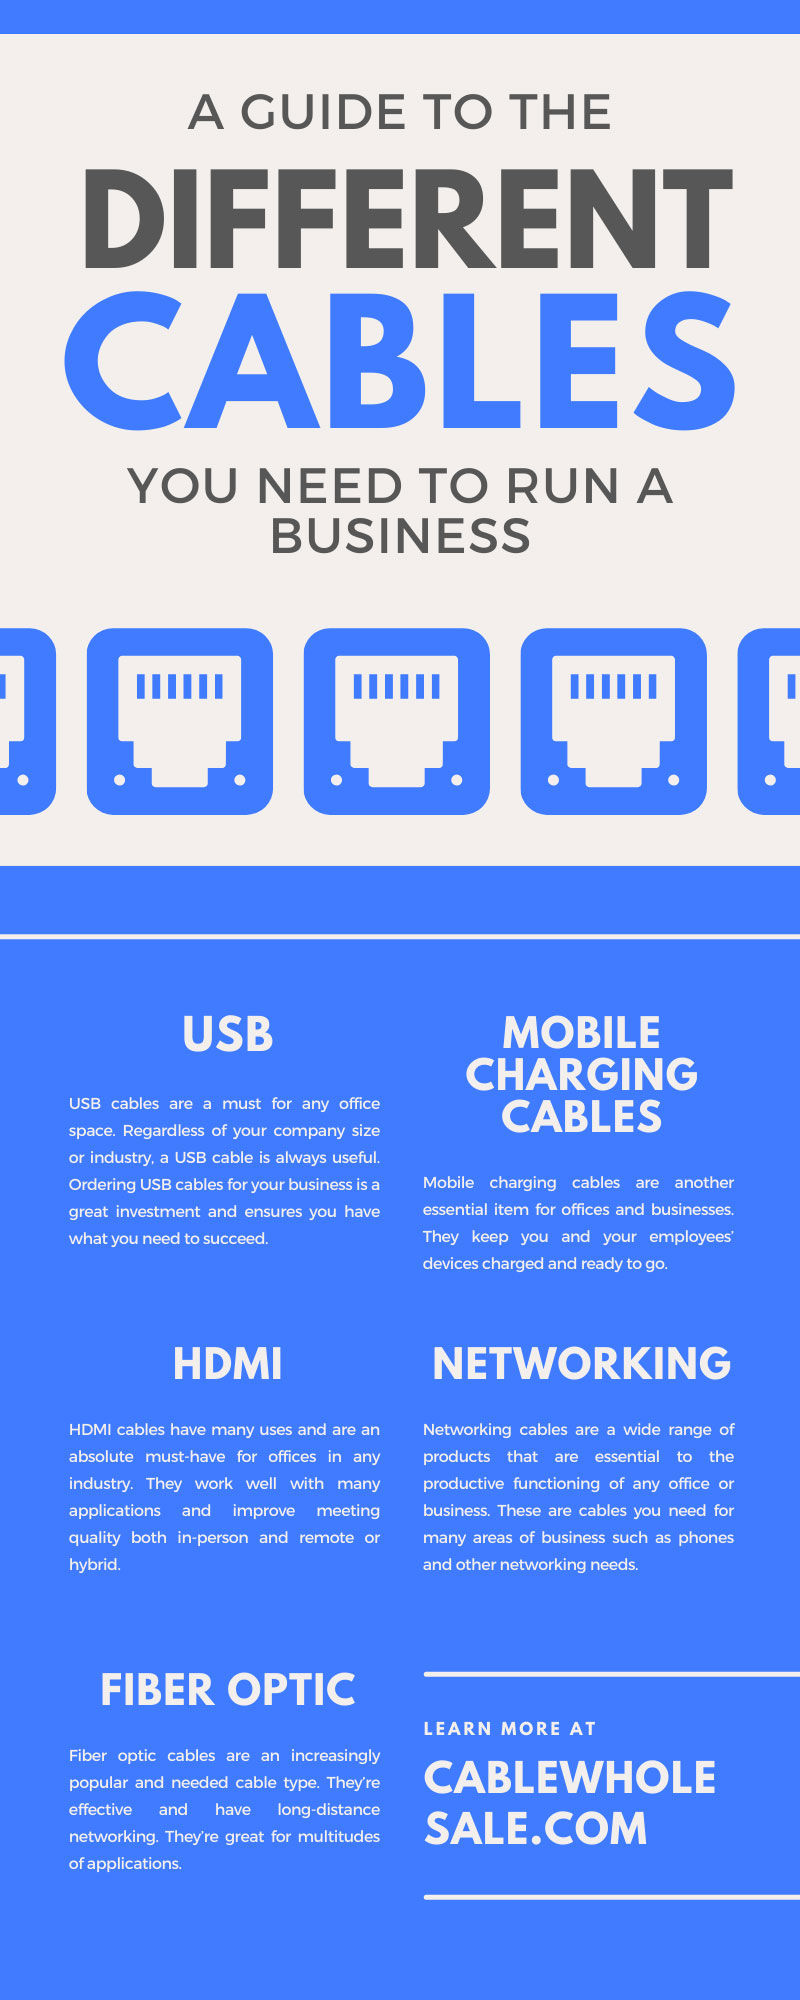 A Guide To the Different Cables You Need To Run a Business